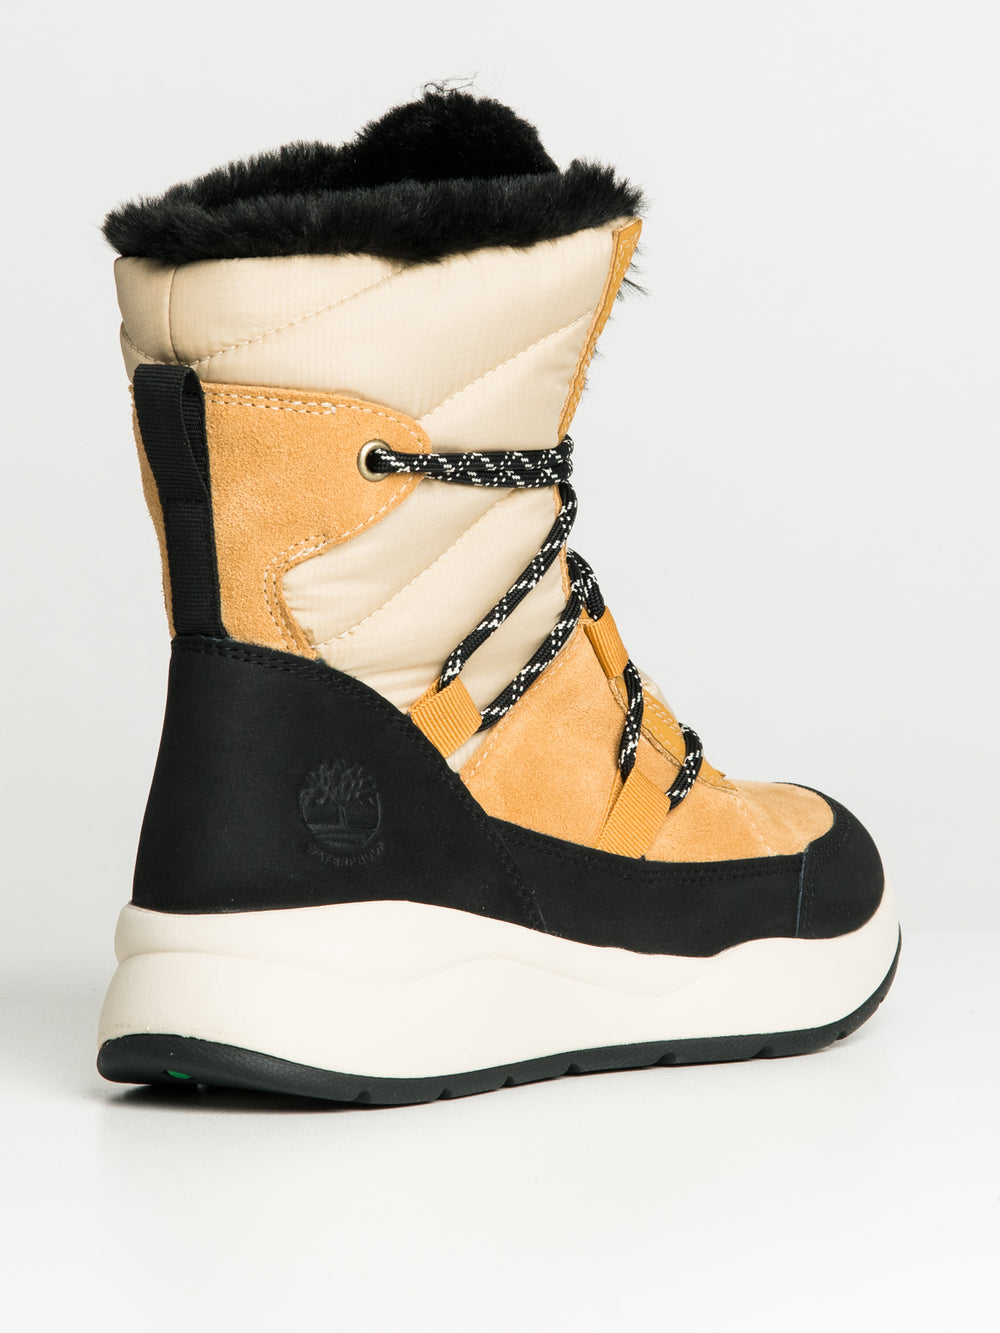 WOMENS TIMBERLAND BOROUGHS MID LACE-UP WINTER WATERPROOF BOOT - CLEARANCE